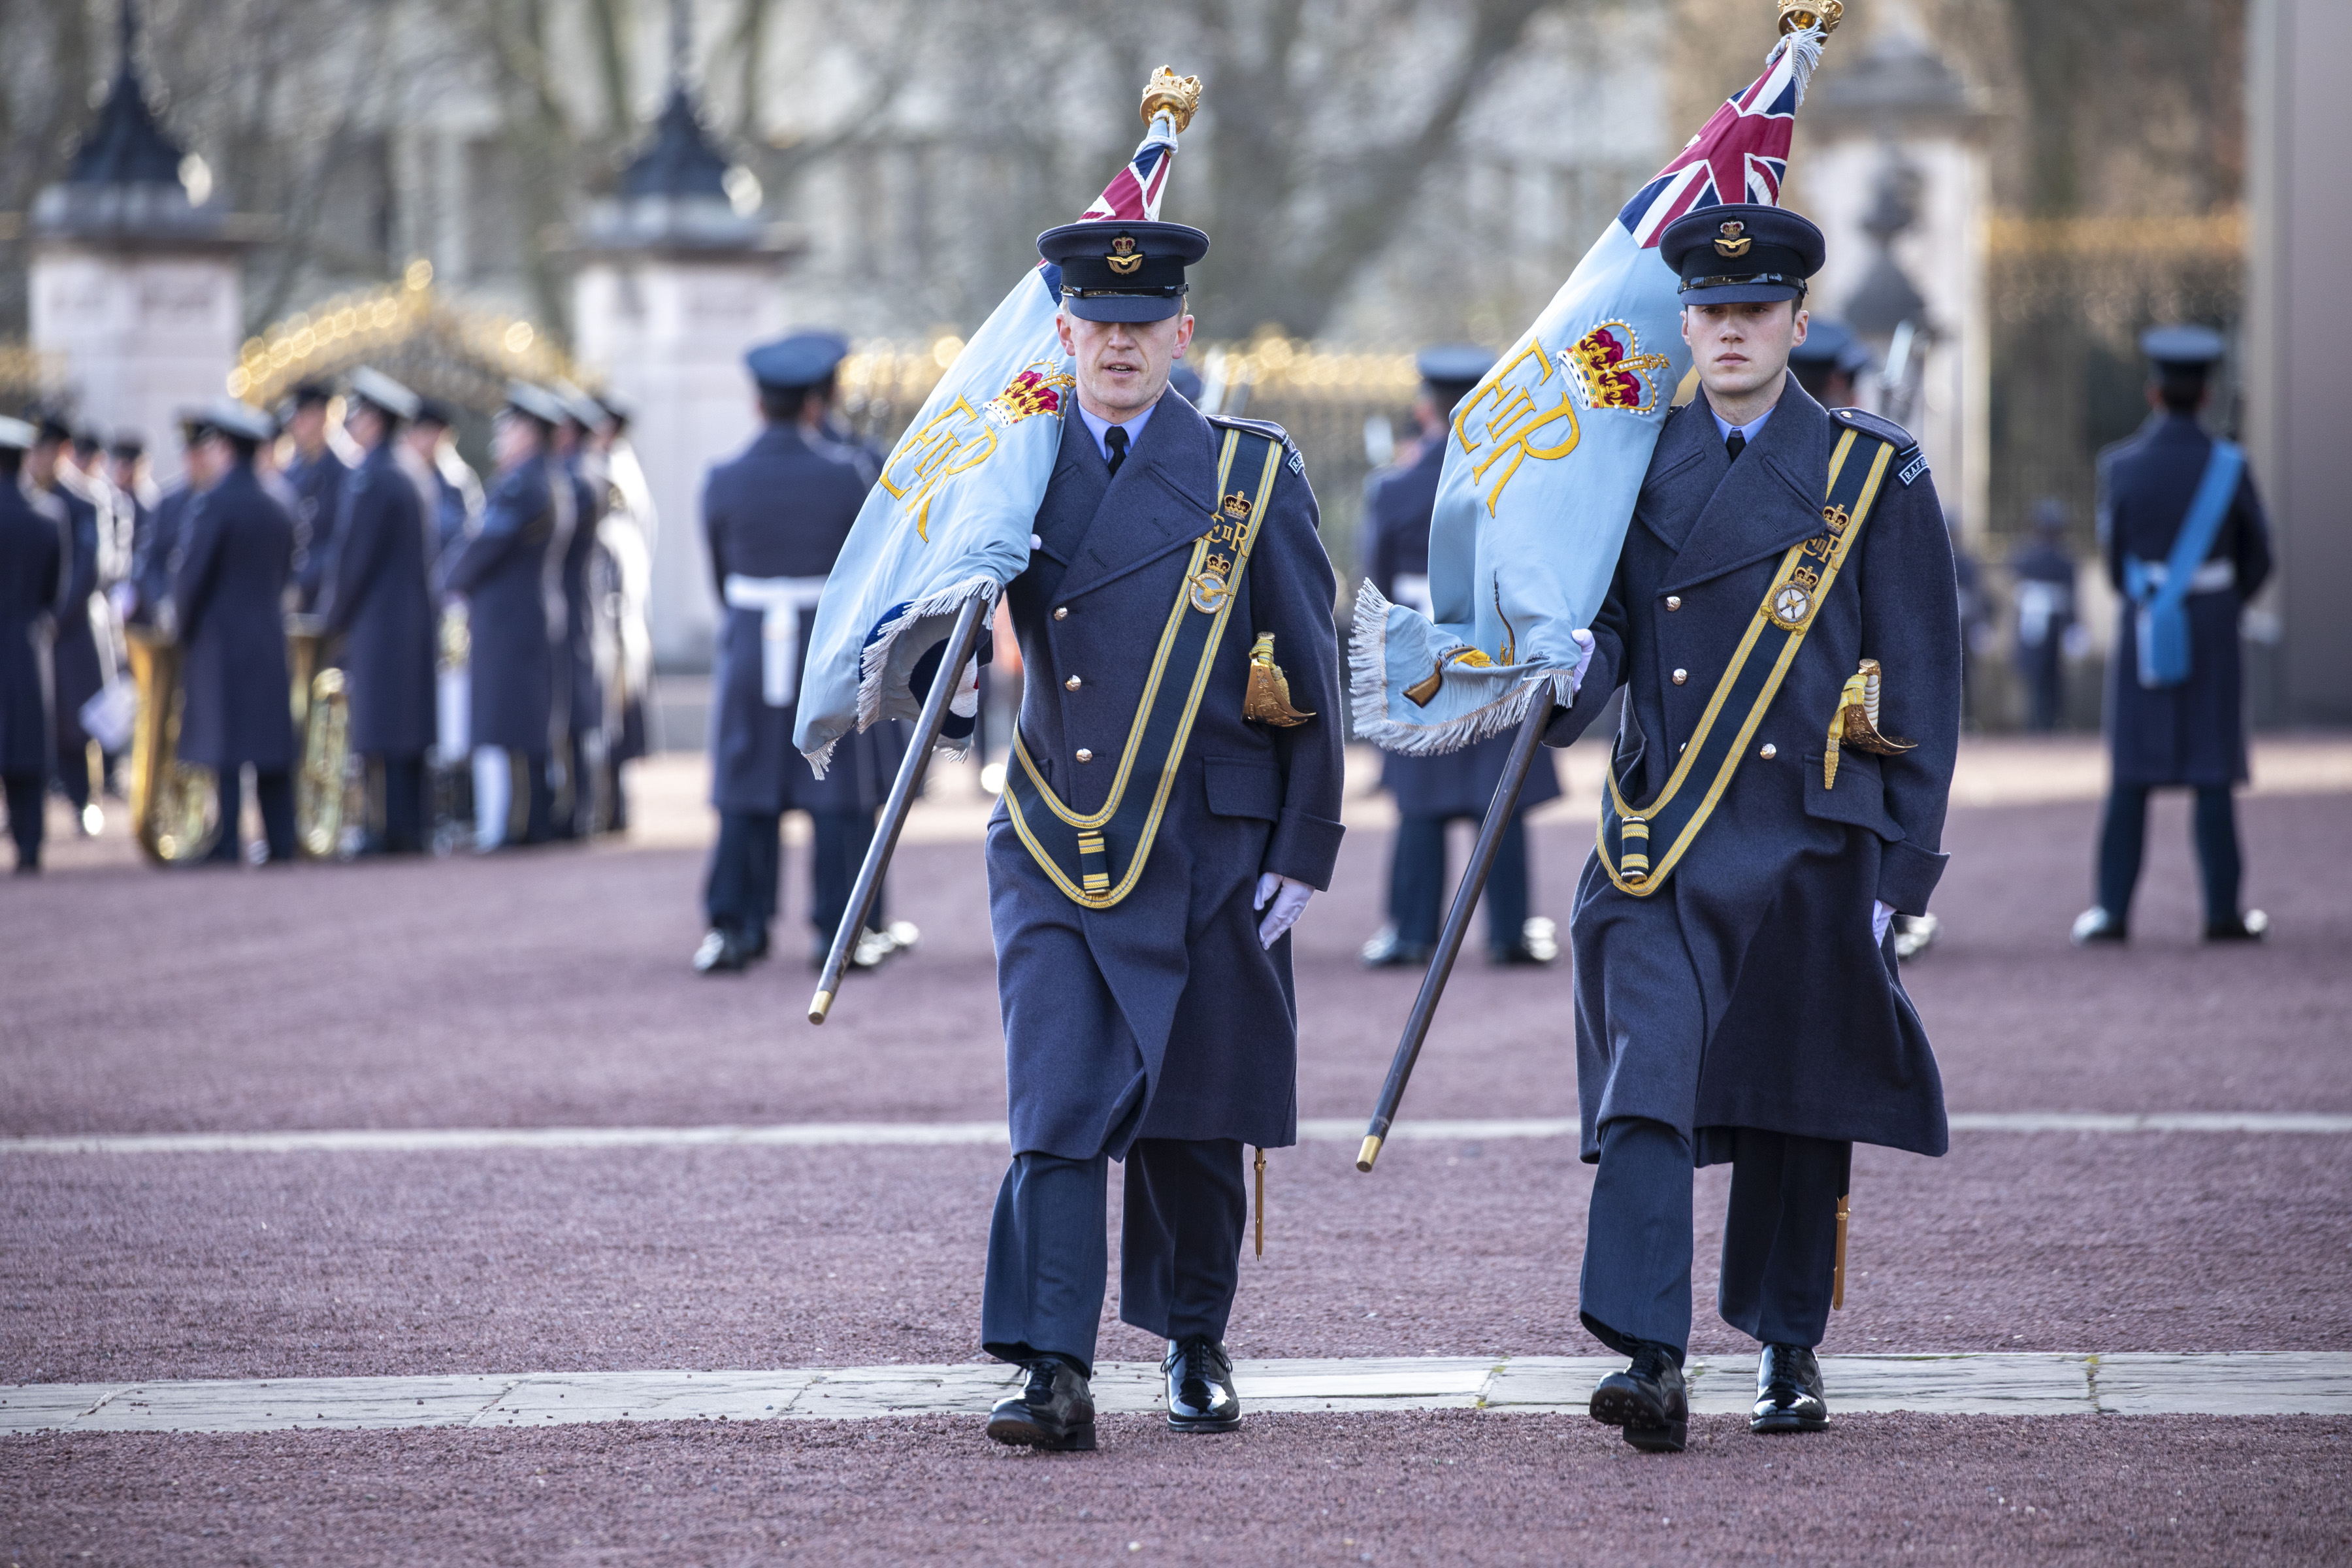 Queen's Colour Squadron on parade outside Buckingham Palace.